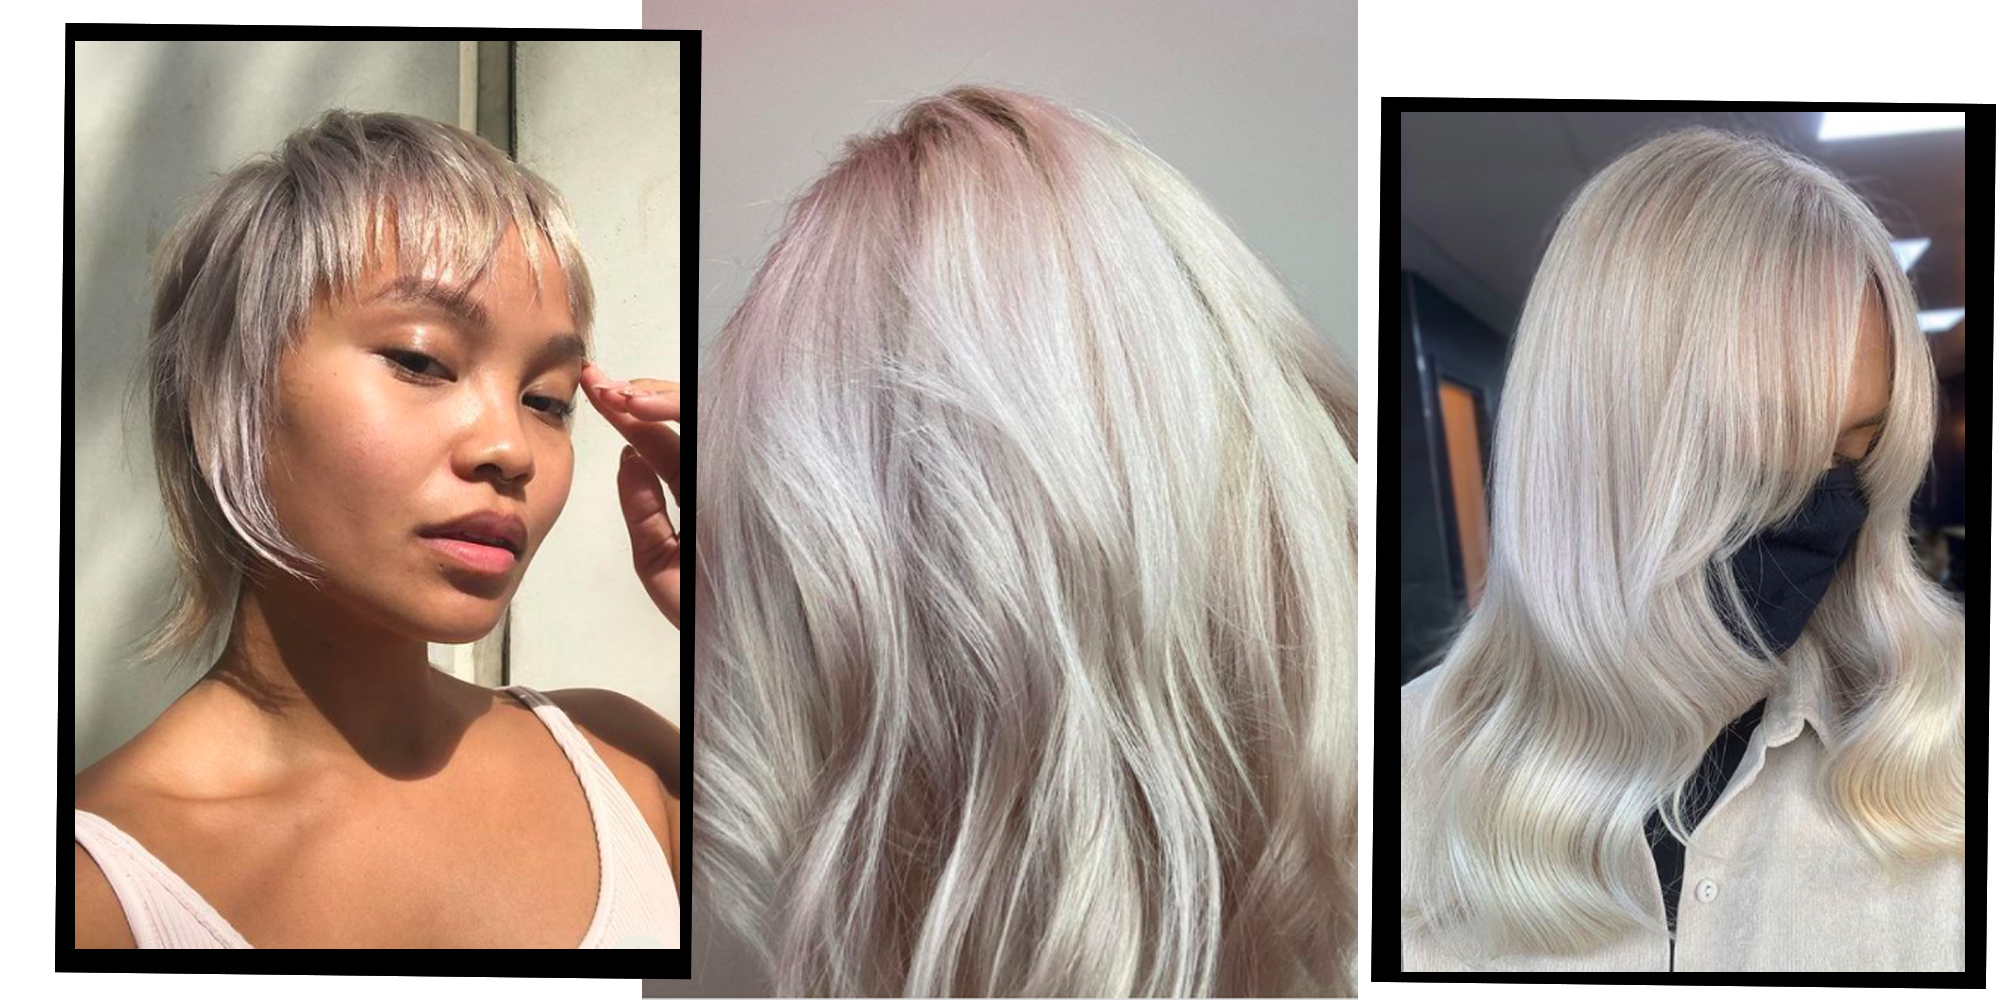 Silver Hair Trend: 51 Cool Grey Hair Colors to Try in 2022 - Glowsly